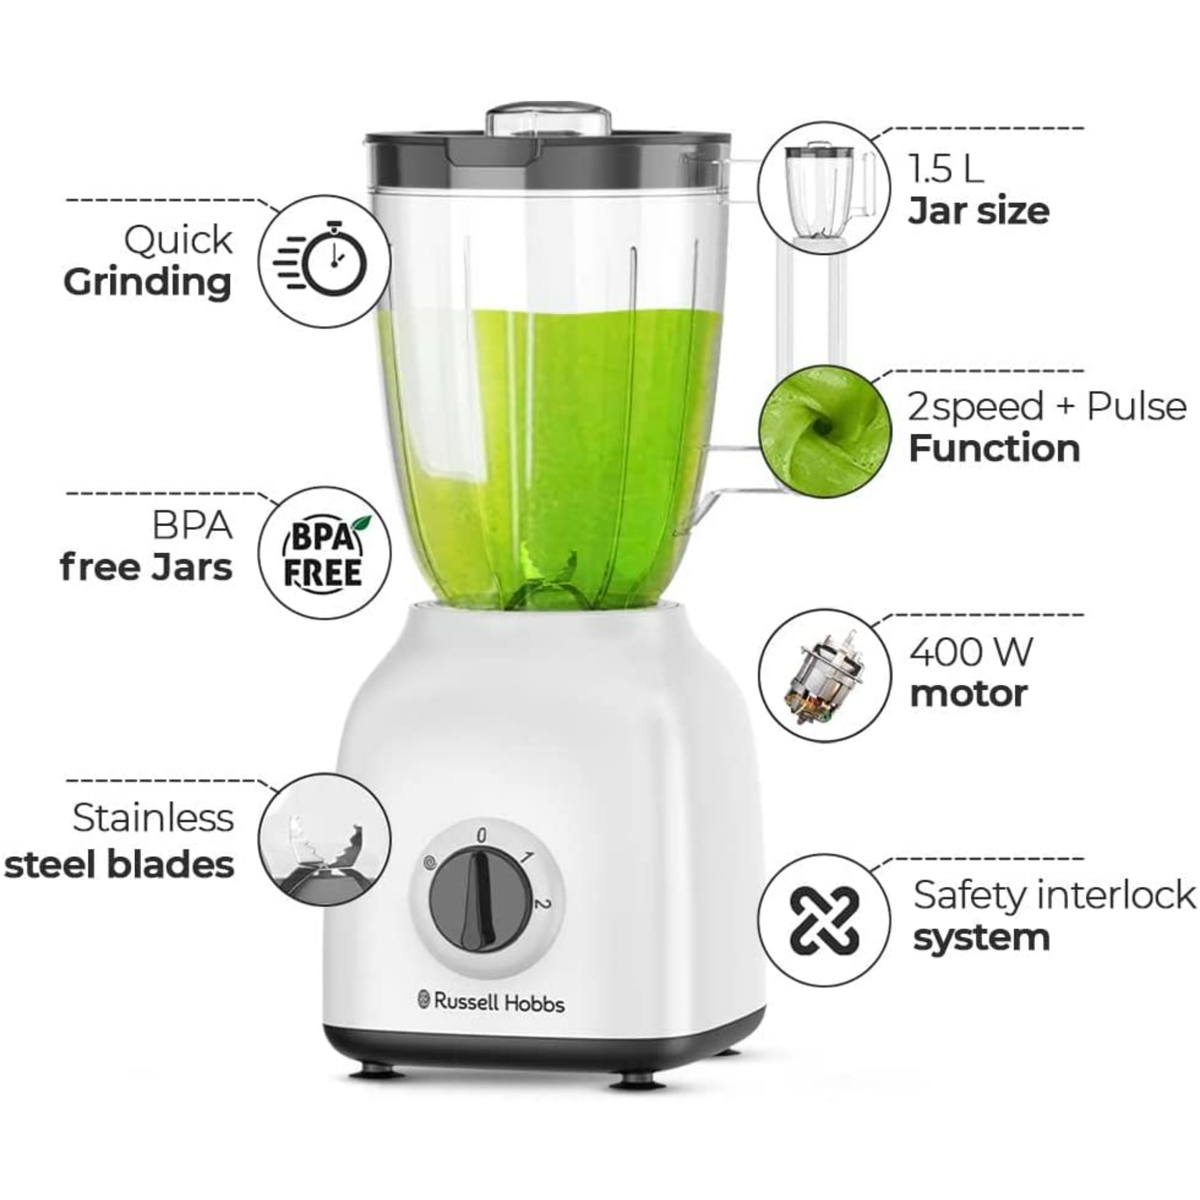 Russell Hobbs 400W 4 in 1 Blender, 2 Grinder & Multi Chopper Mill, 1.5L Smoothie Maker, Multifunction High Speed Mixer Grinder for Coffee Beans, Spices & Nuts, 2 Speed & Pulse Function White - BWM103.